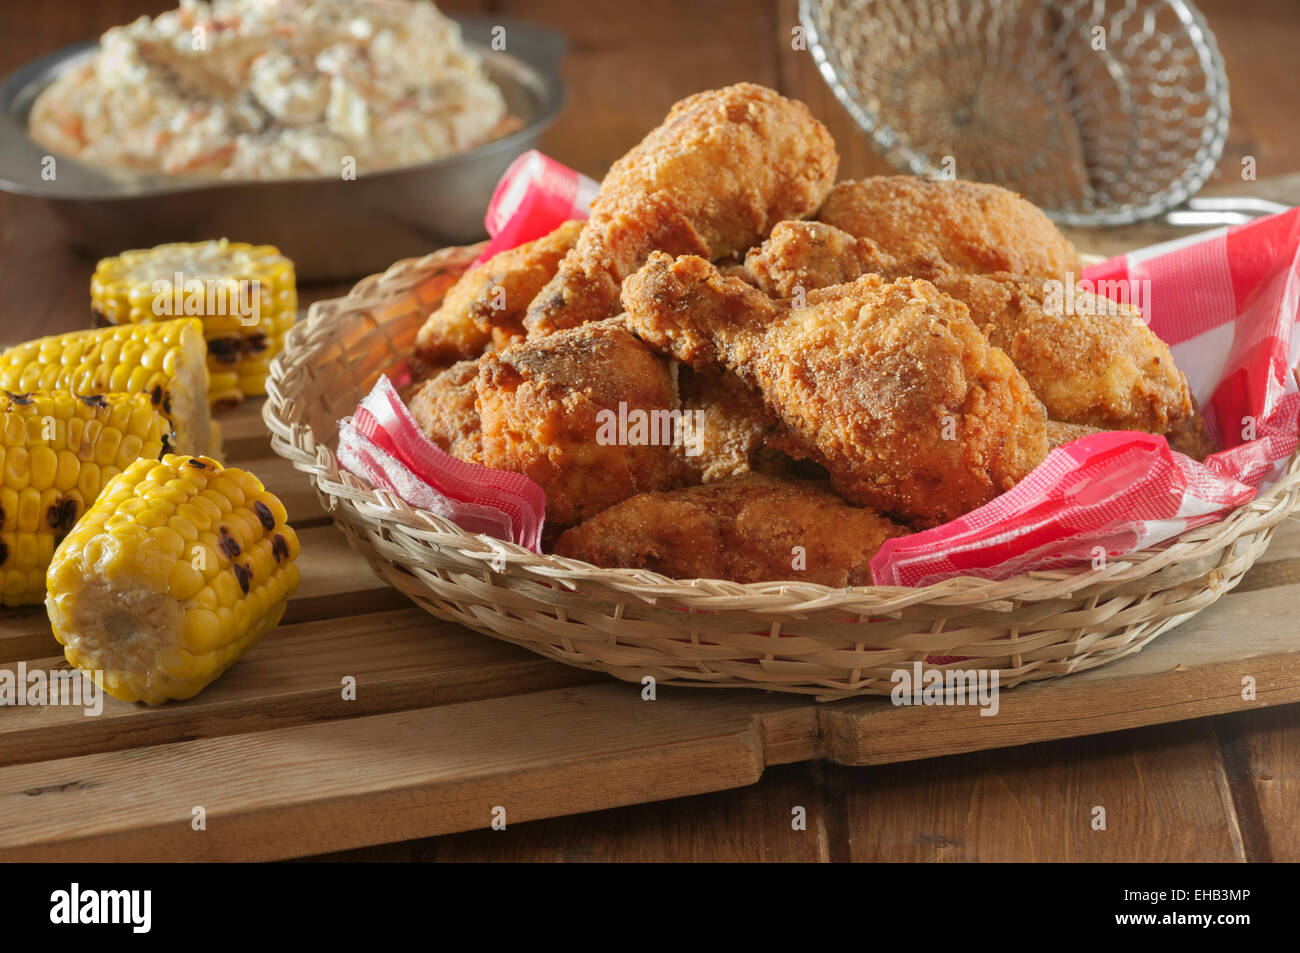 Southern fried chicken with coleslaw and grilled corn Stock Photo